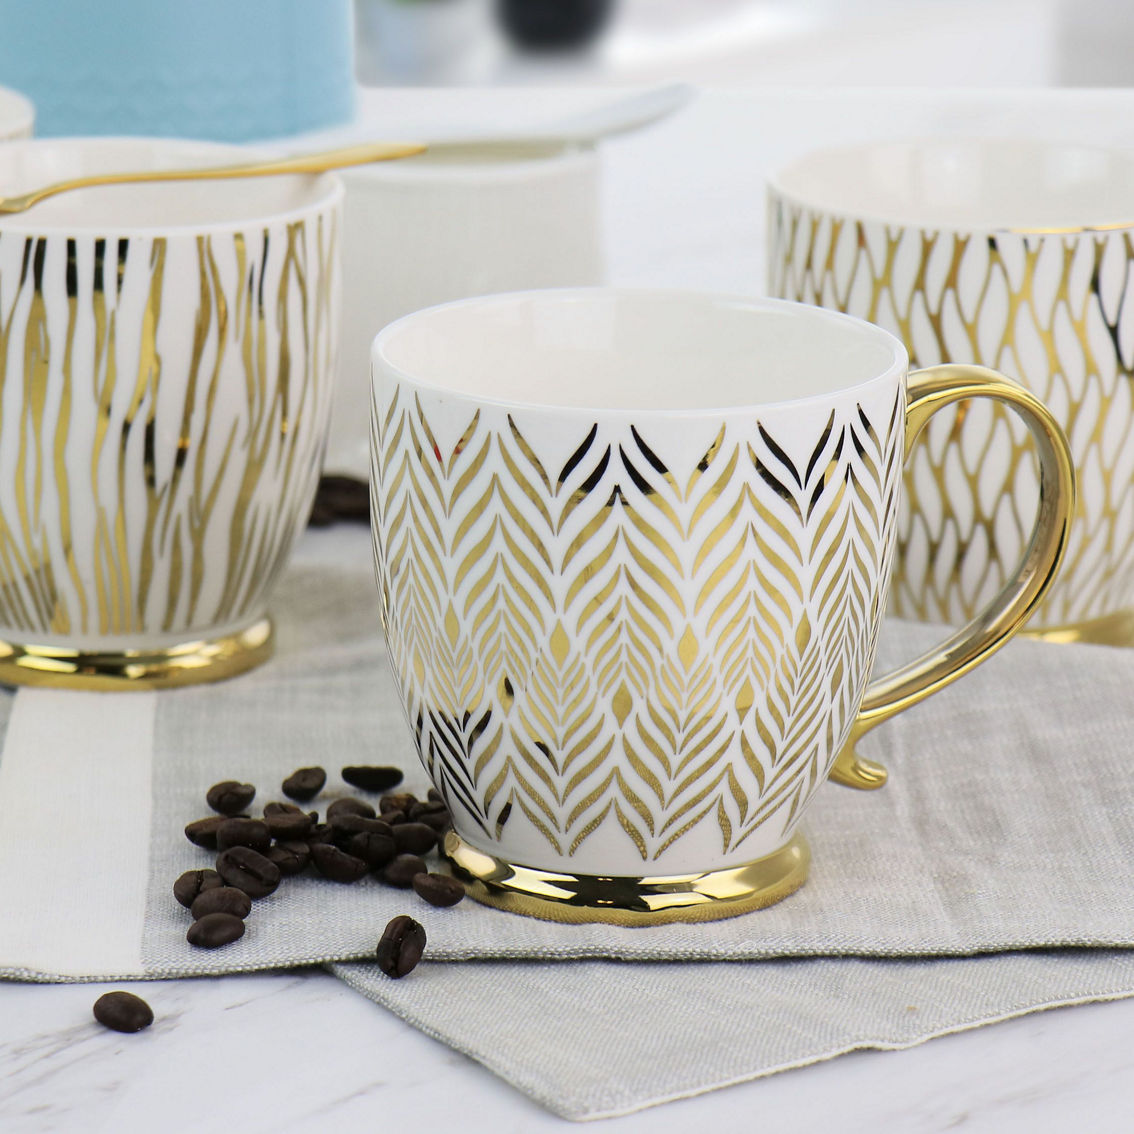 Gibson Home Gold Finch 4 Piece 16.7oz Electroplated Fine Ceramic Mug Set in Gold - Image 5 of 5